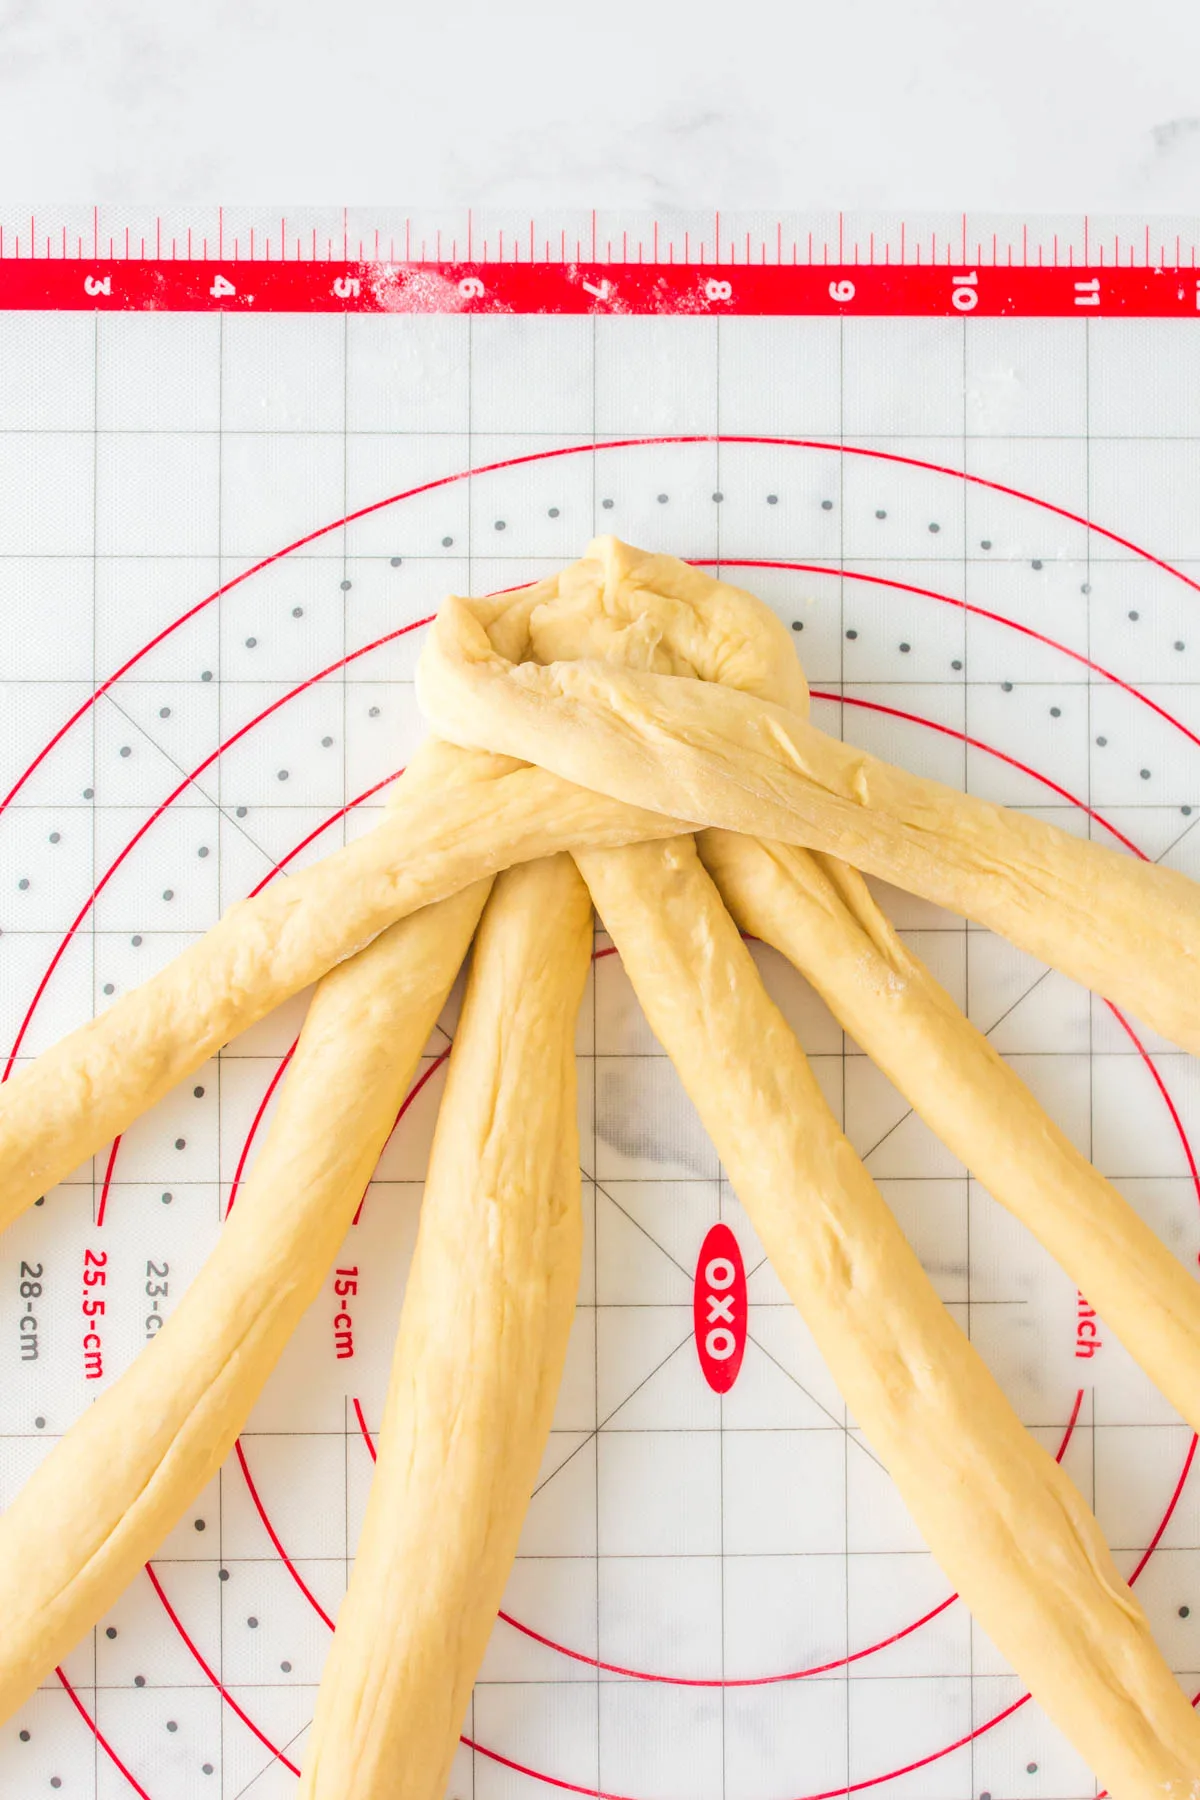 Image of challah dough strands braided together.